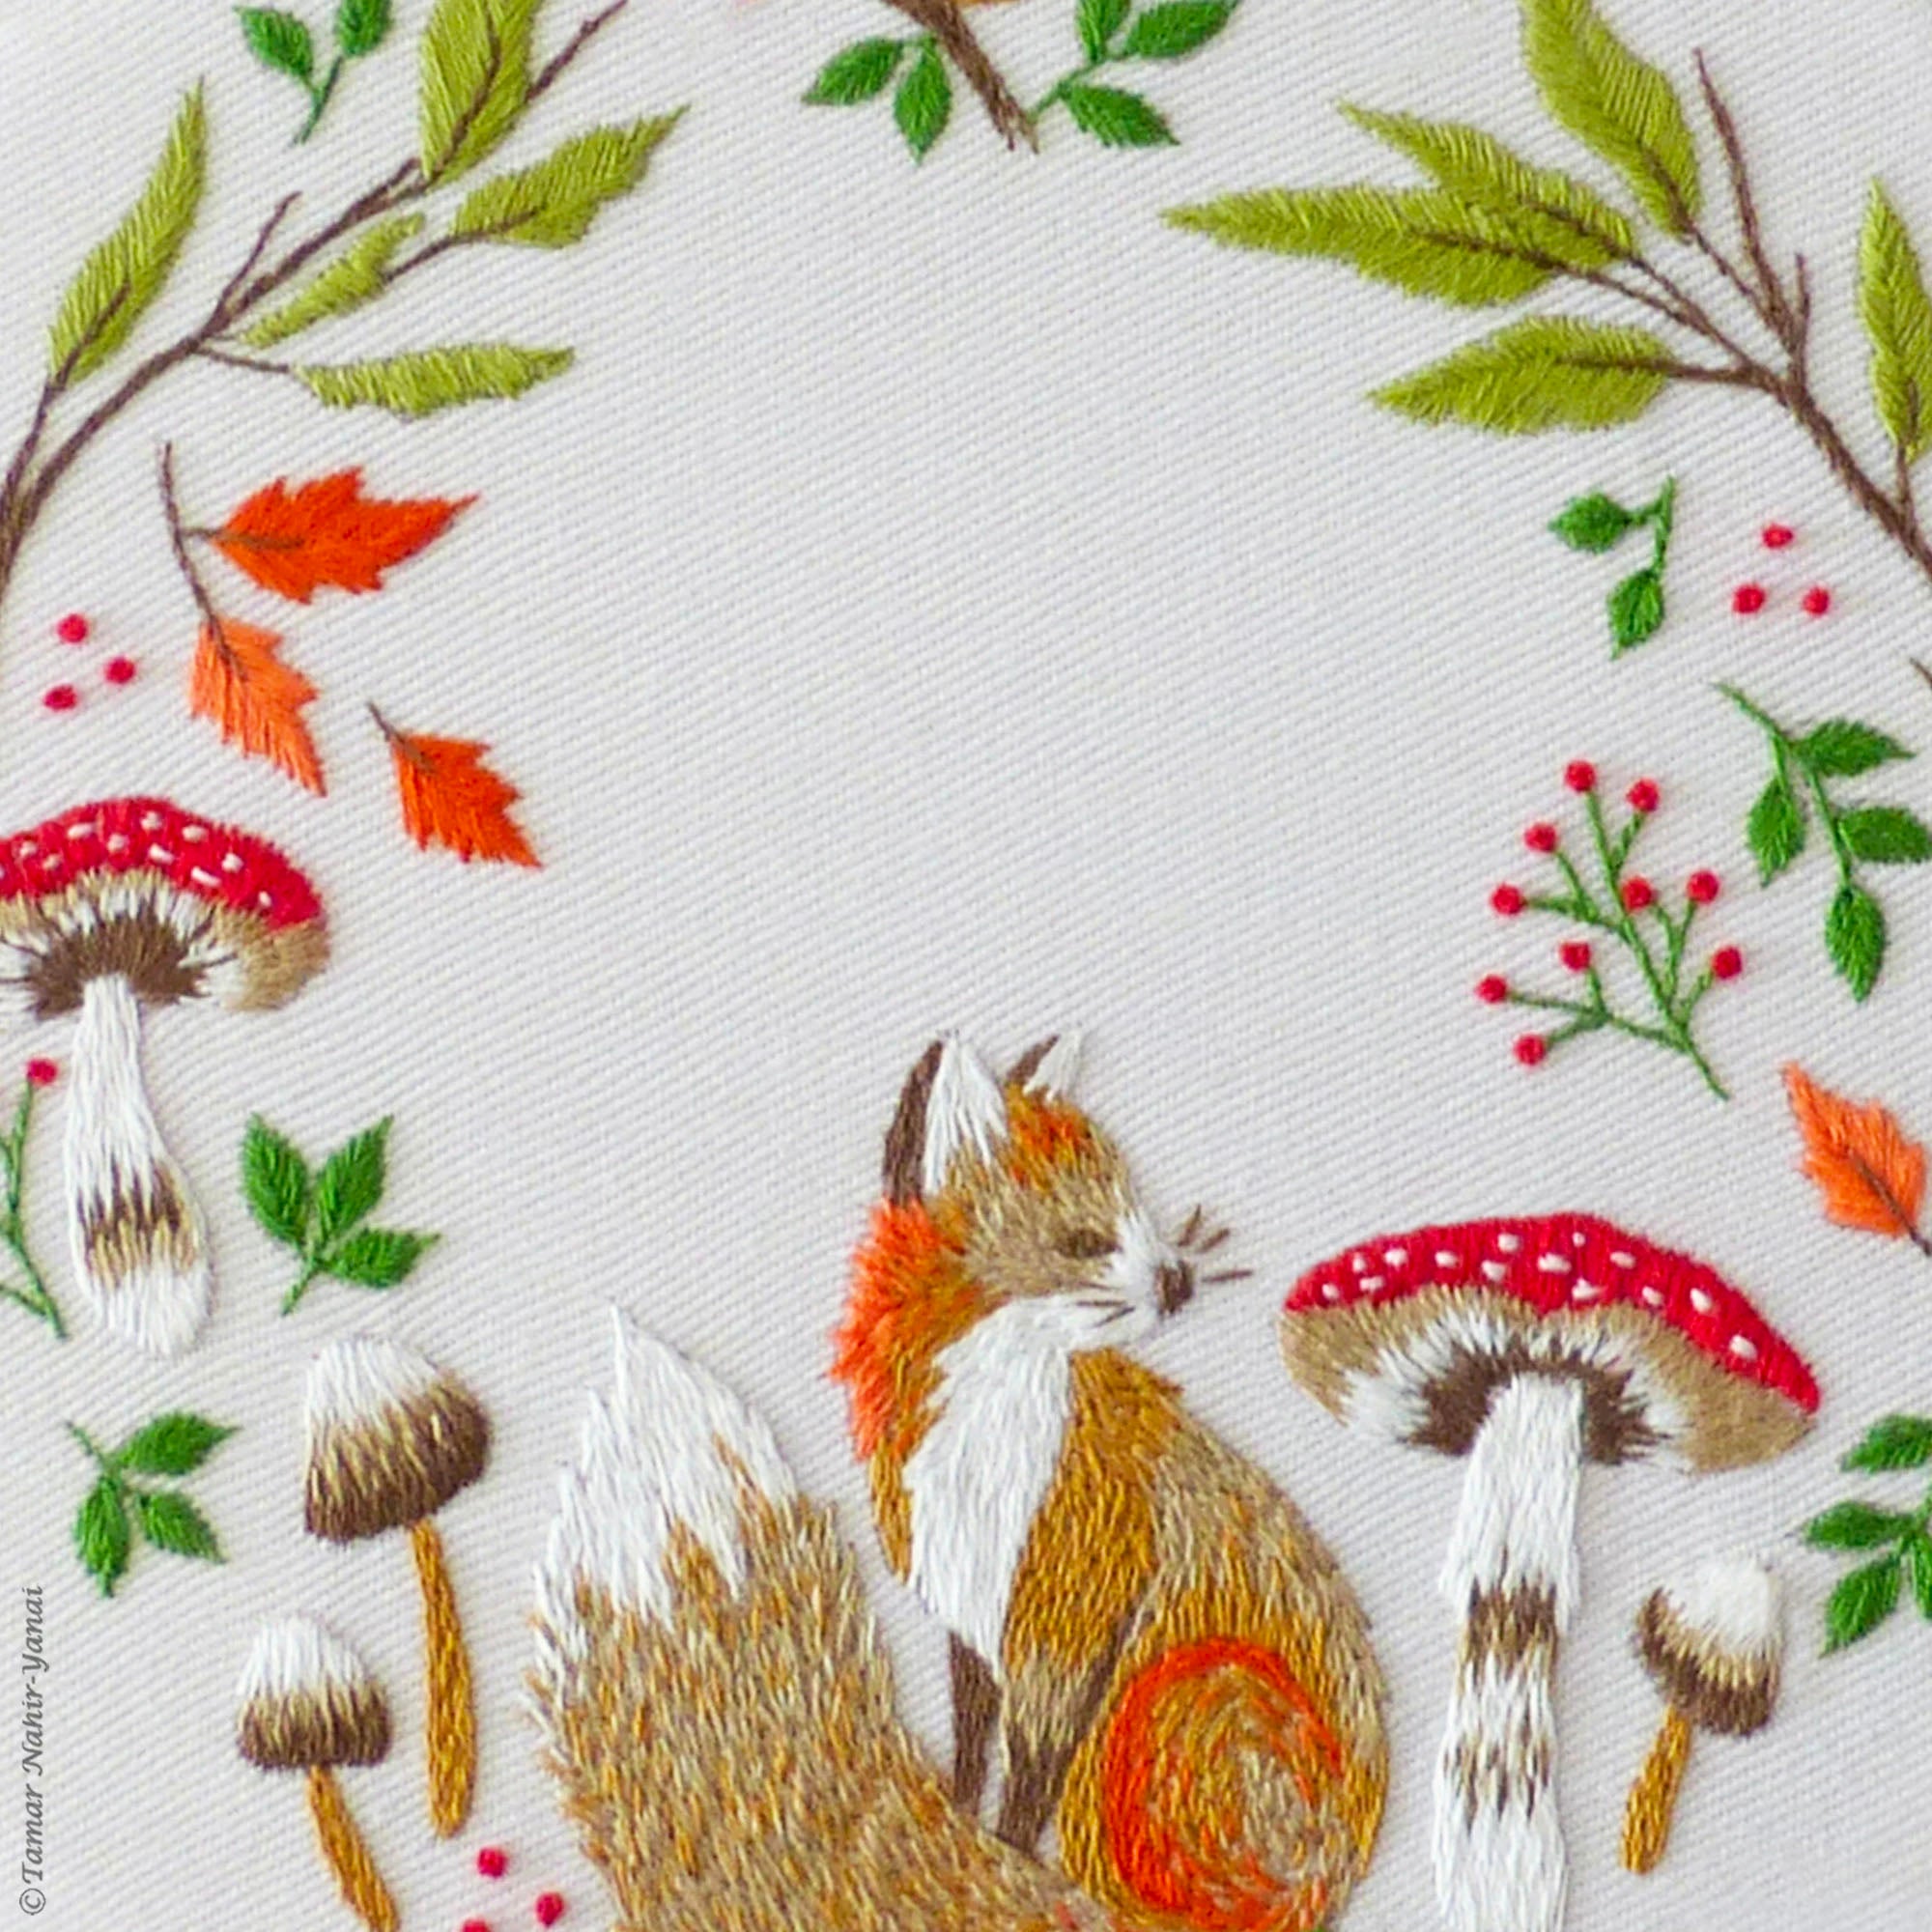 Free Hand Embroidery Designs for Autumn – a Small Collection